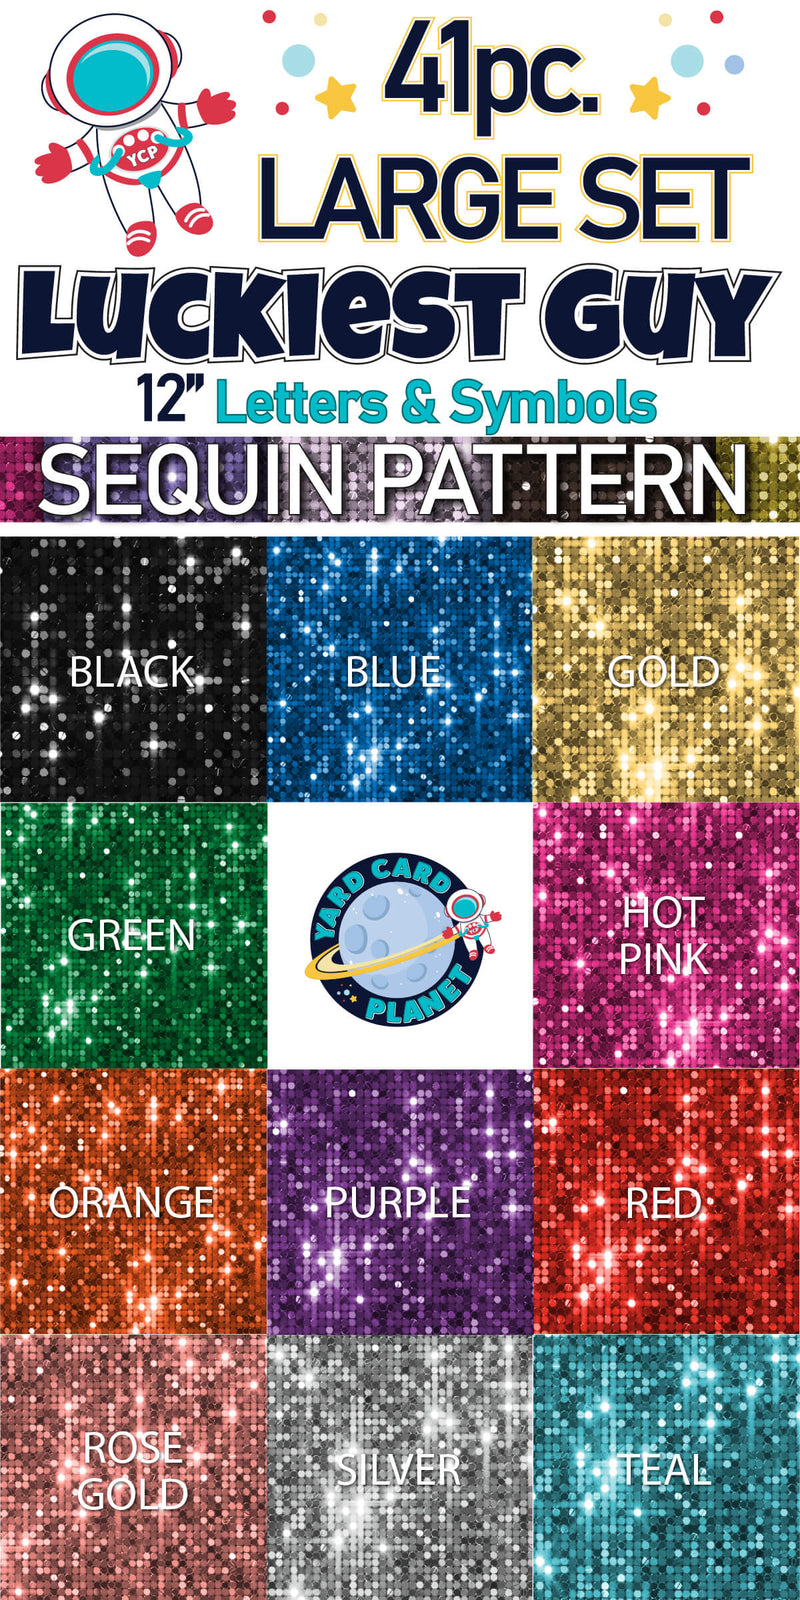 12" Luckiest Guy 41 pc. Letters and Symbols Set in Sequin Pattern Color Options